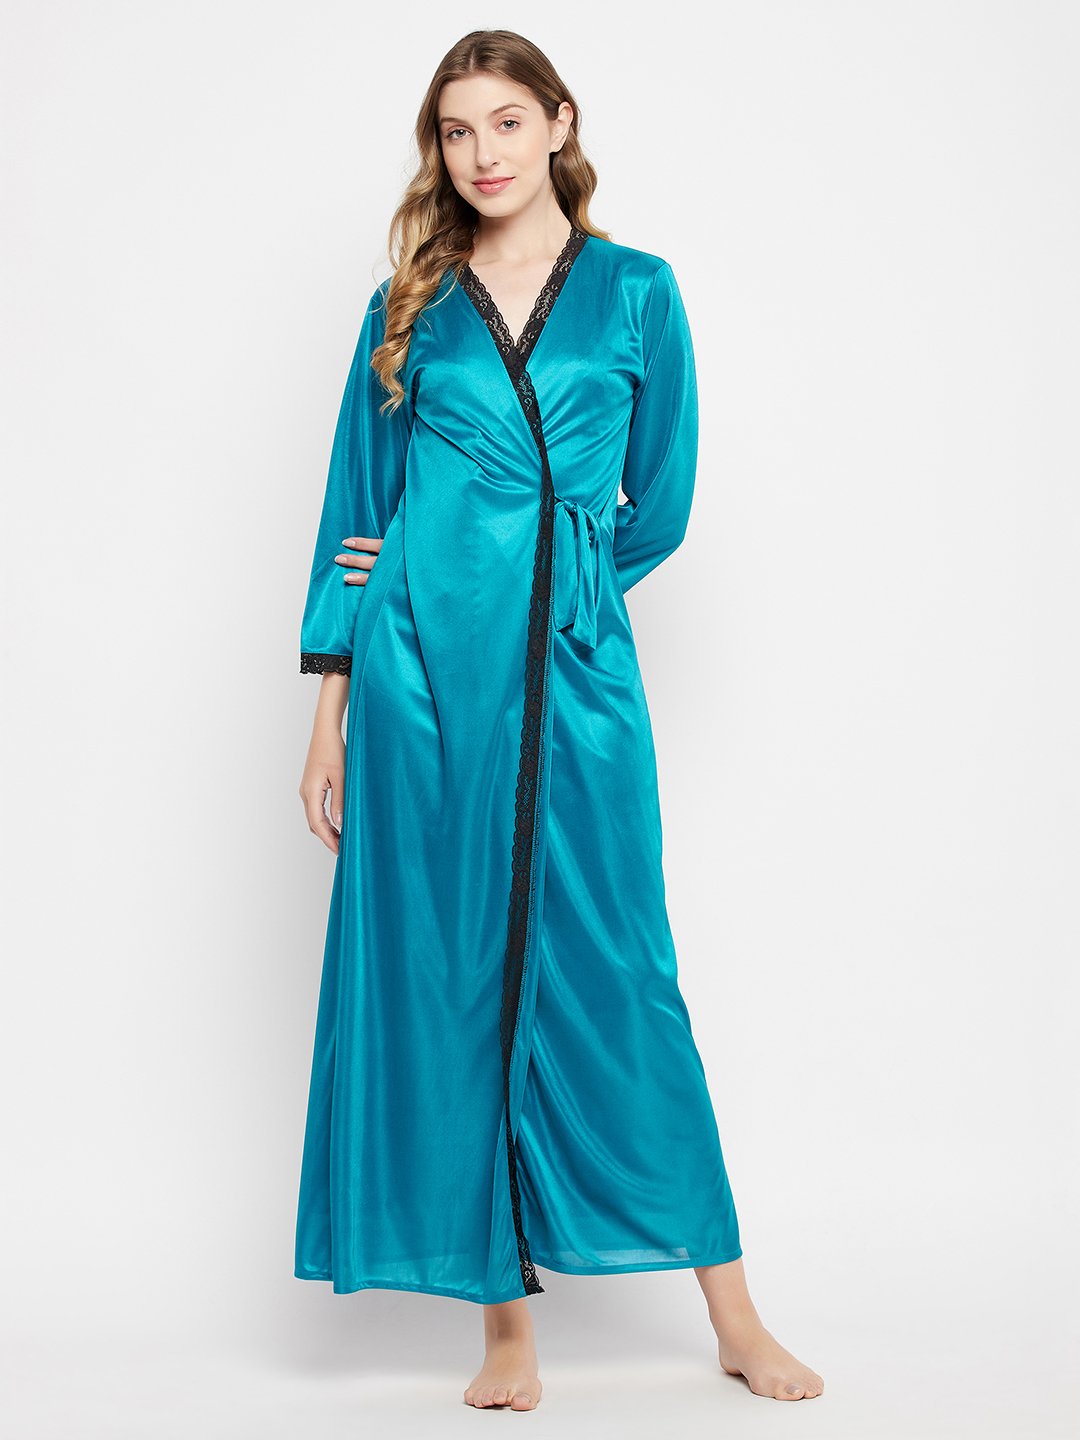 Chic Basic Robe in Teal Blue – Satin